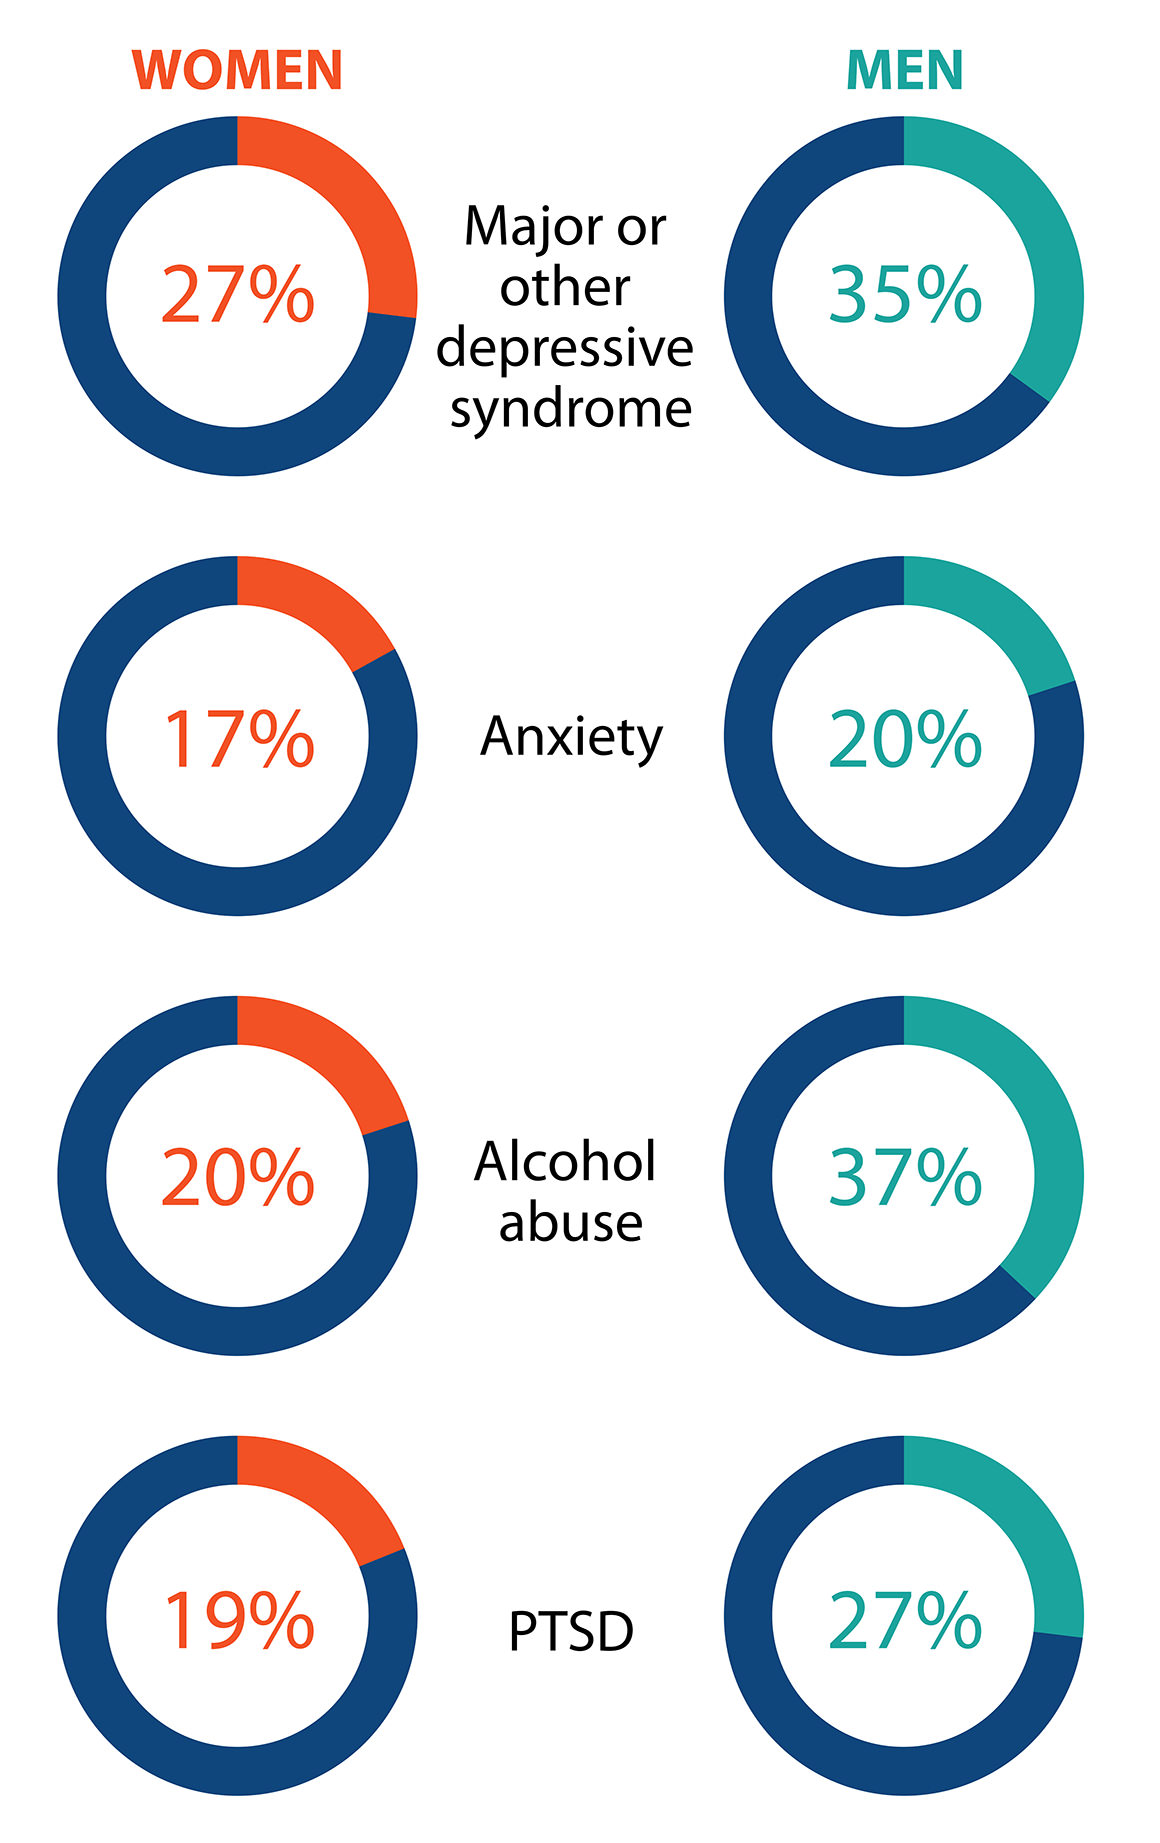 Chart depicts percentages of men and women who reported MST that also reported major or other depressive sundrome, anxiety alcohol abuse, or PTSD.